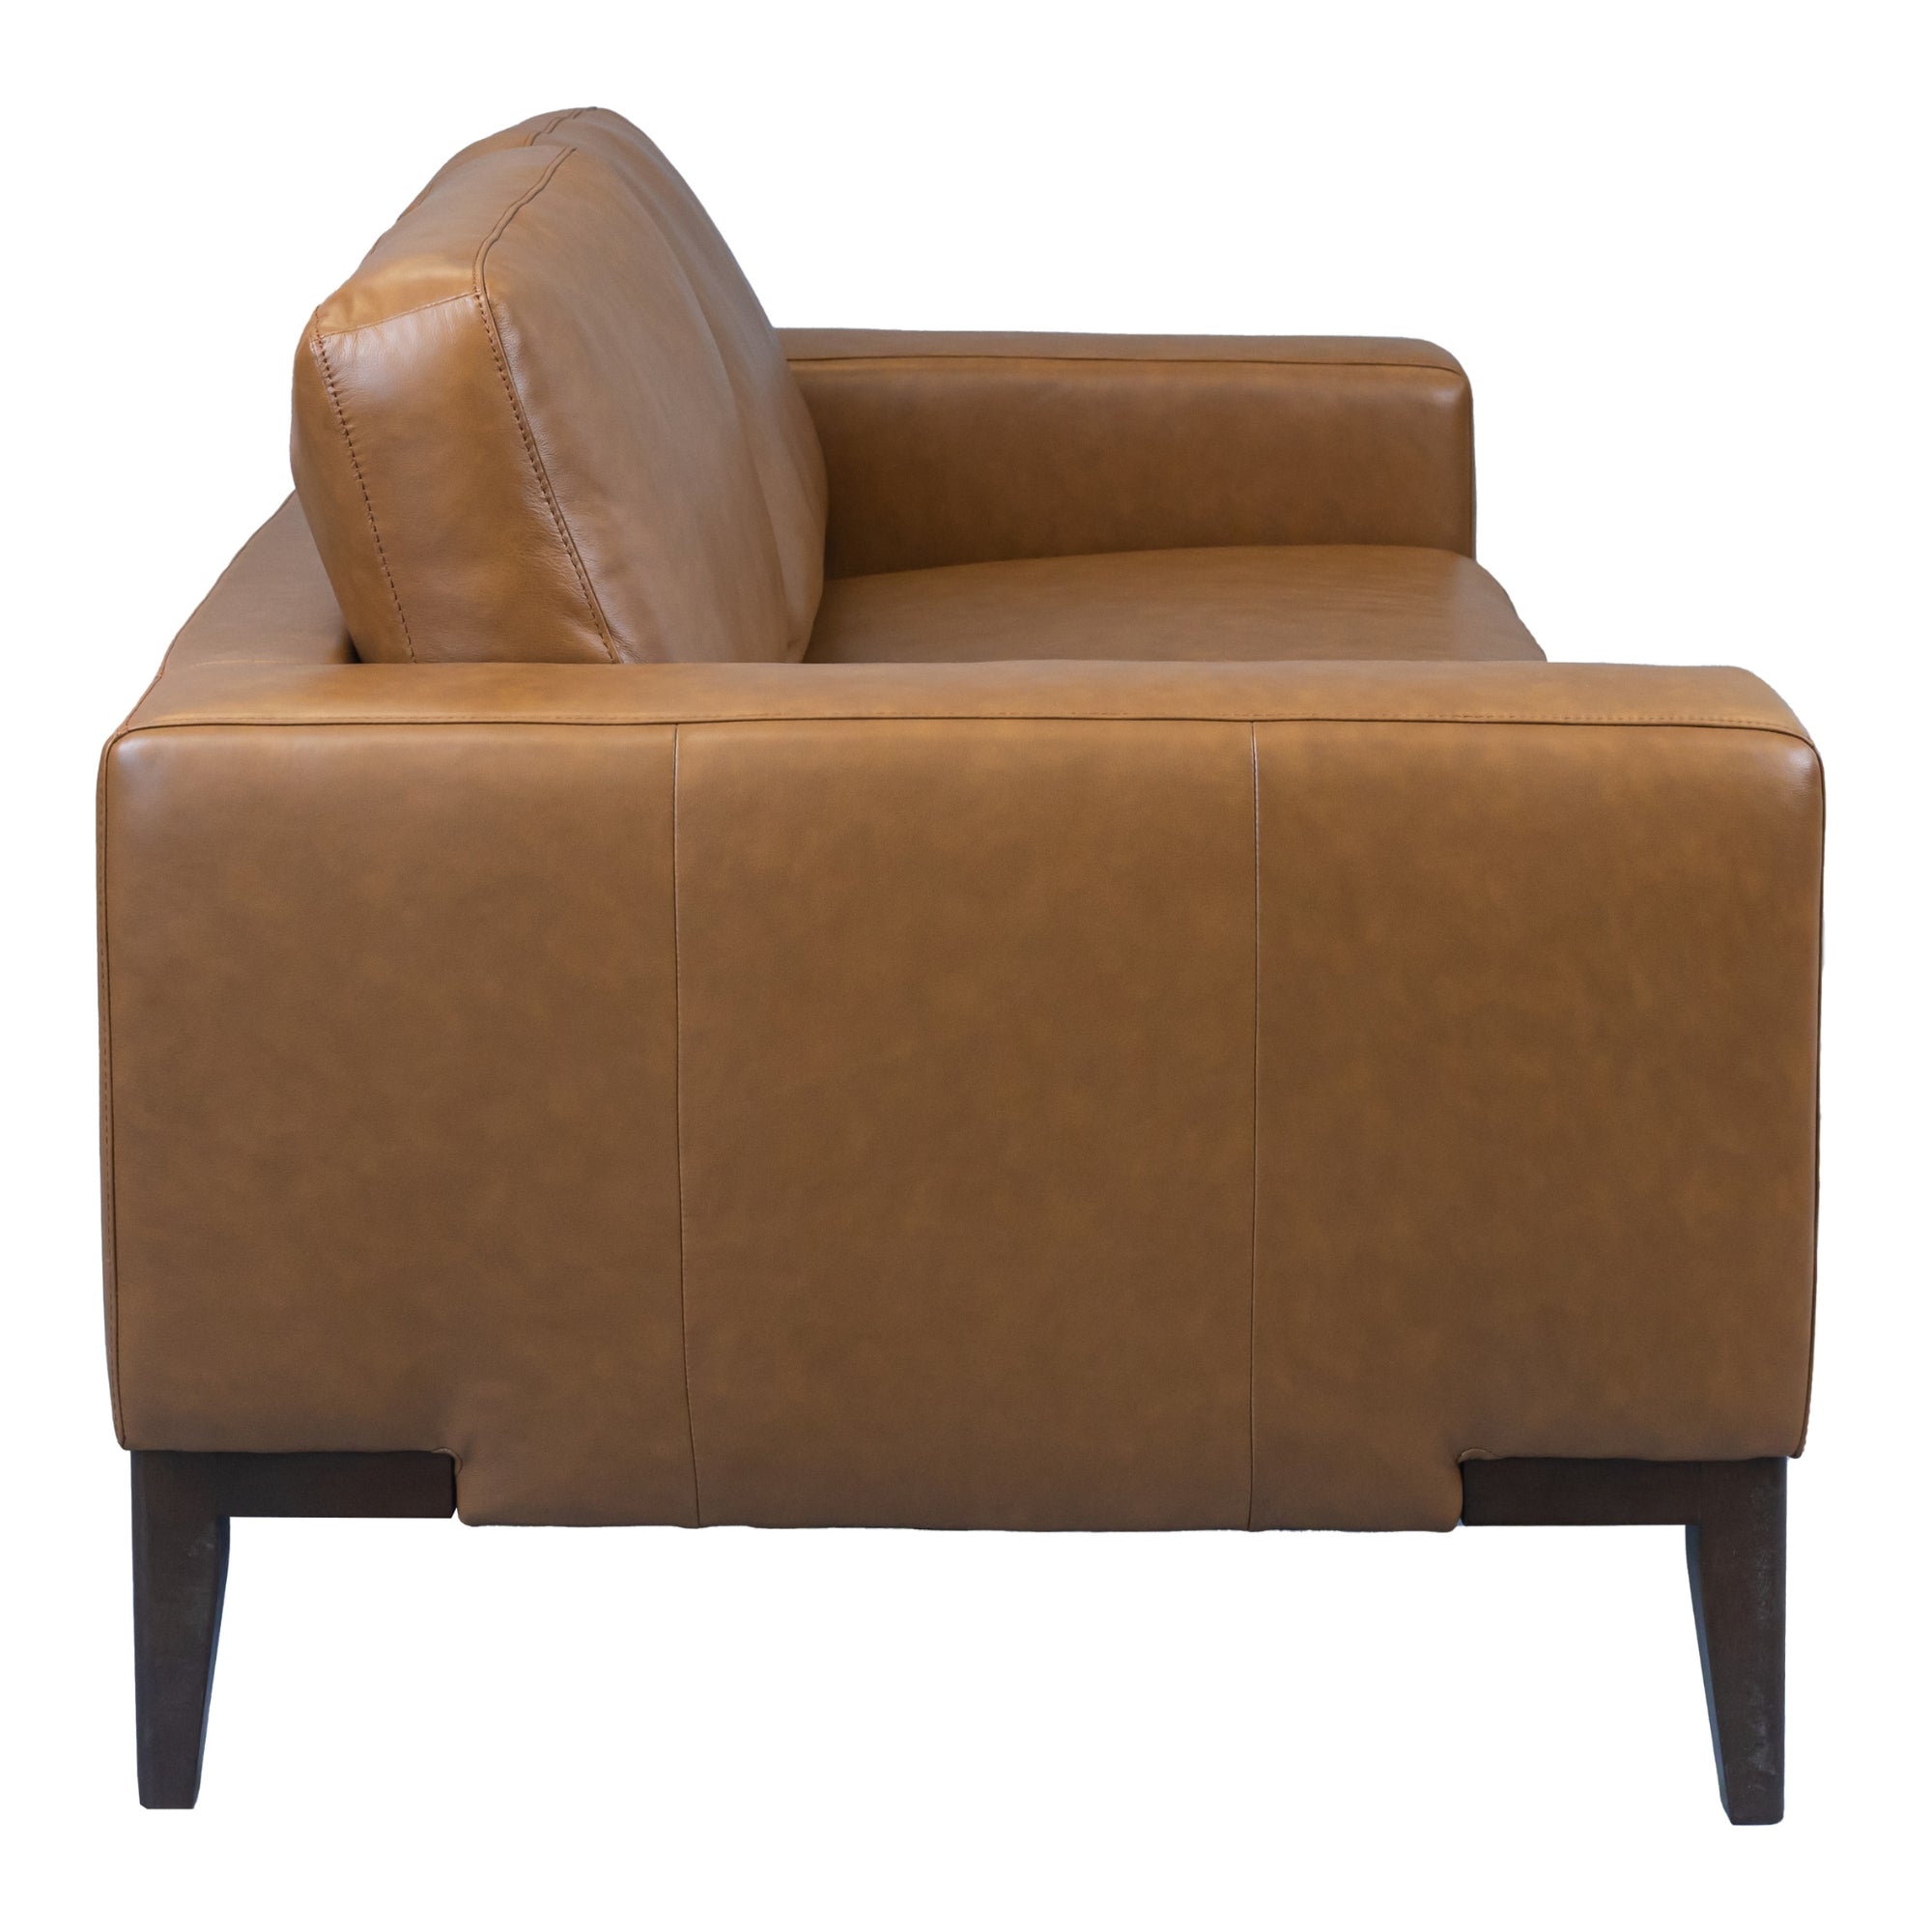 Modern Tan Leather 3-Seater Sofa, Wide Arms, Durable Frame